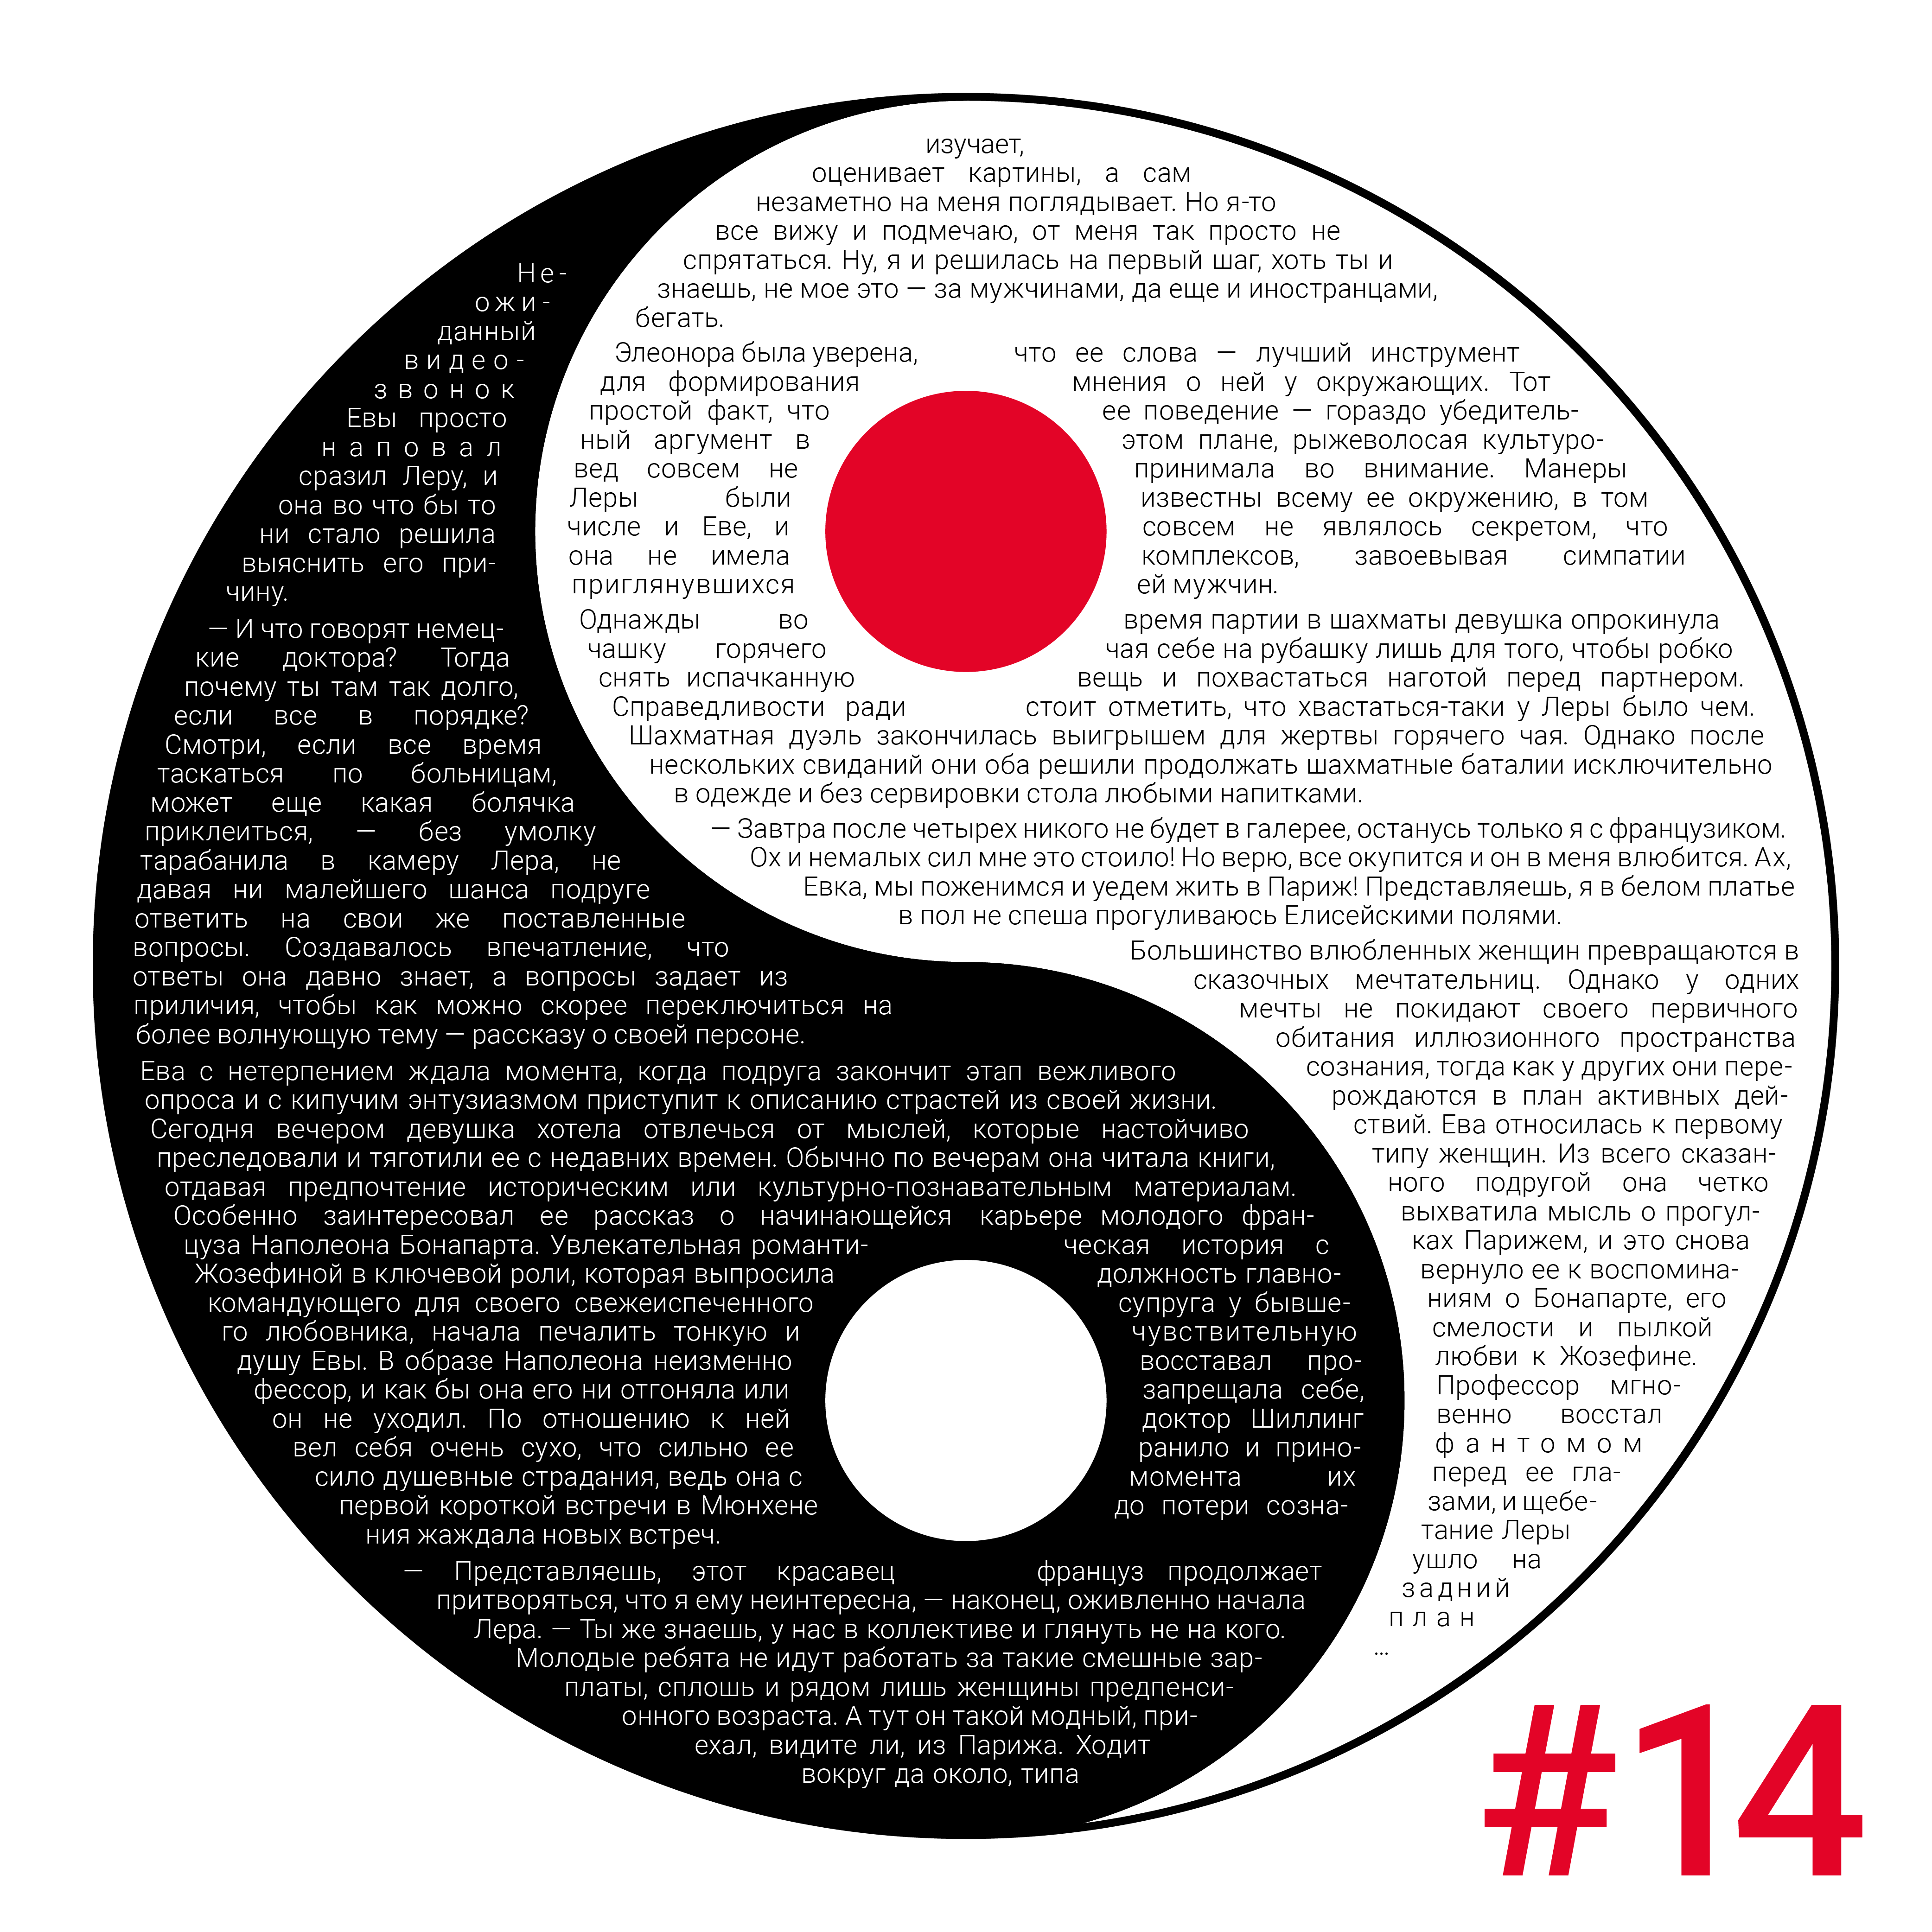 Page #14 represents duality of Yin and Yang. There can be no positive without a negative, no open without closed, no light without shadow. In fact, each side has a little bit of the other in it and is not complete opposite, but a complement to each other. This universal idea is reflected in the perfection of the main character Eve and the imperfection of her beloved Adam, in her charming kindness and deceitful friends.   Страница №14 представляет двойственность Инь и Ян. Не может быть позитива без негатива, открытого без закрытого, света без тени. На самом деле, каждая сторона содержит что-то от другой и не является полной противоположностью, а дополняет друг друга. Эта универсальная идея отображена в совершенстве главной героини Евы и несовершенстве ее любимого Адама, в ее очаровательной доброте и лживых друзьях.